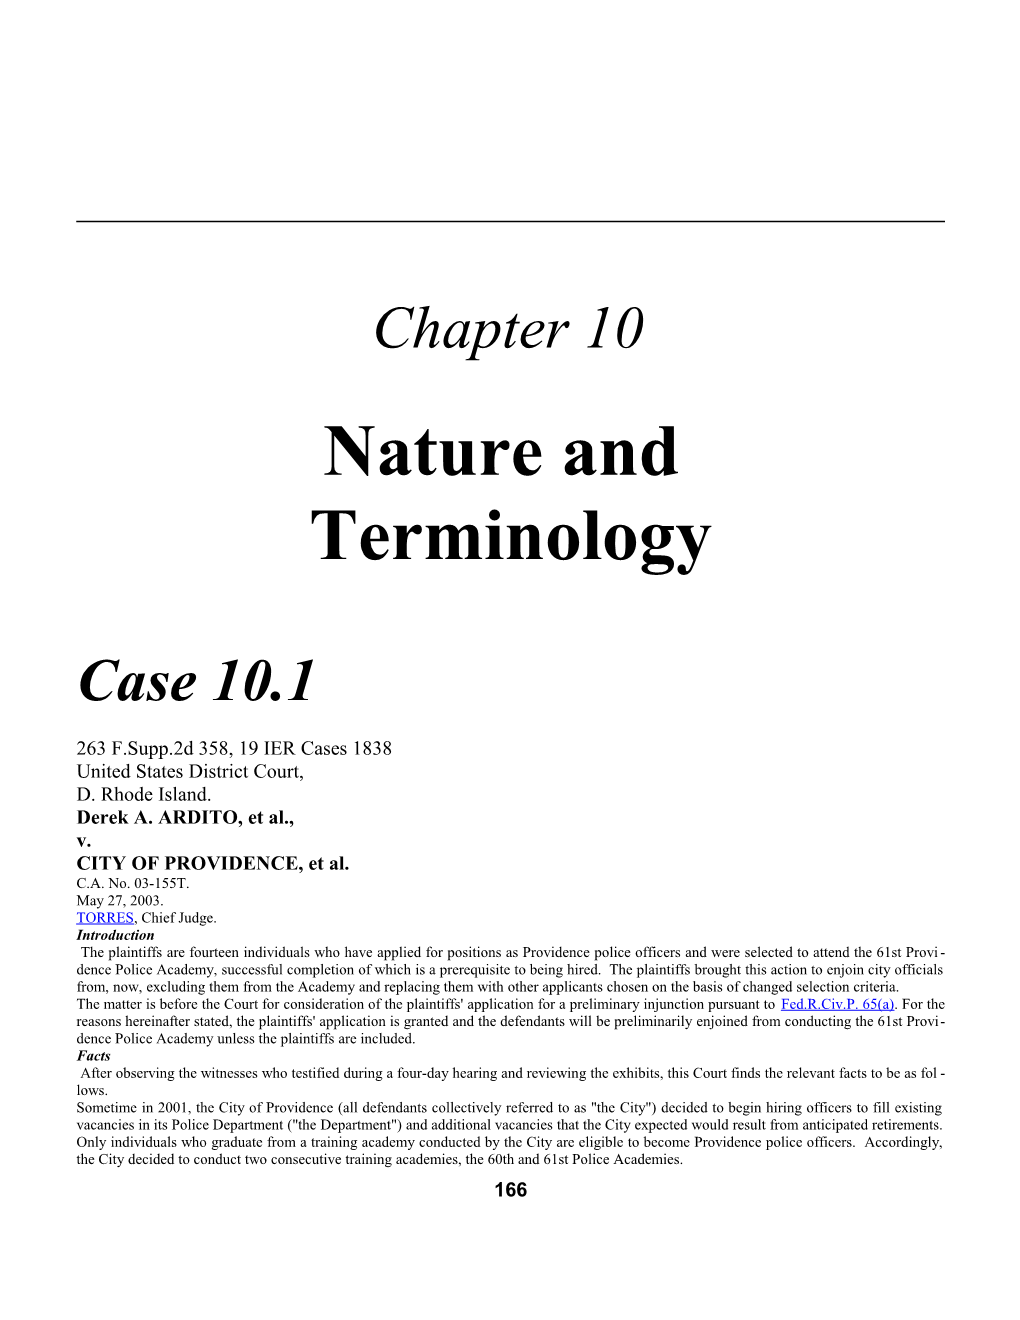 Chapter 10: Nature and Terminology 1